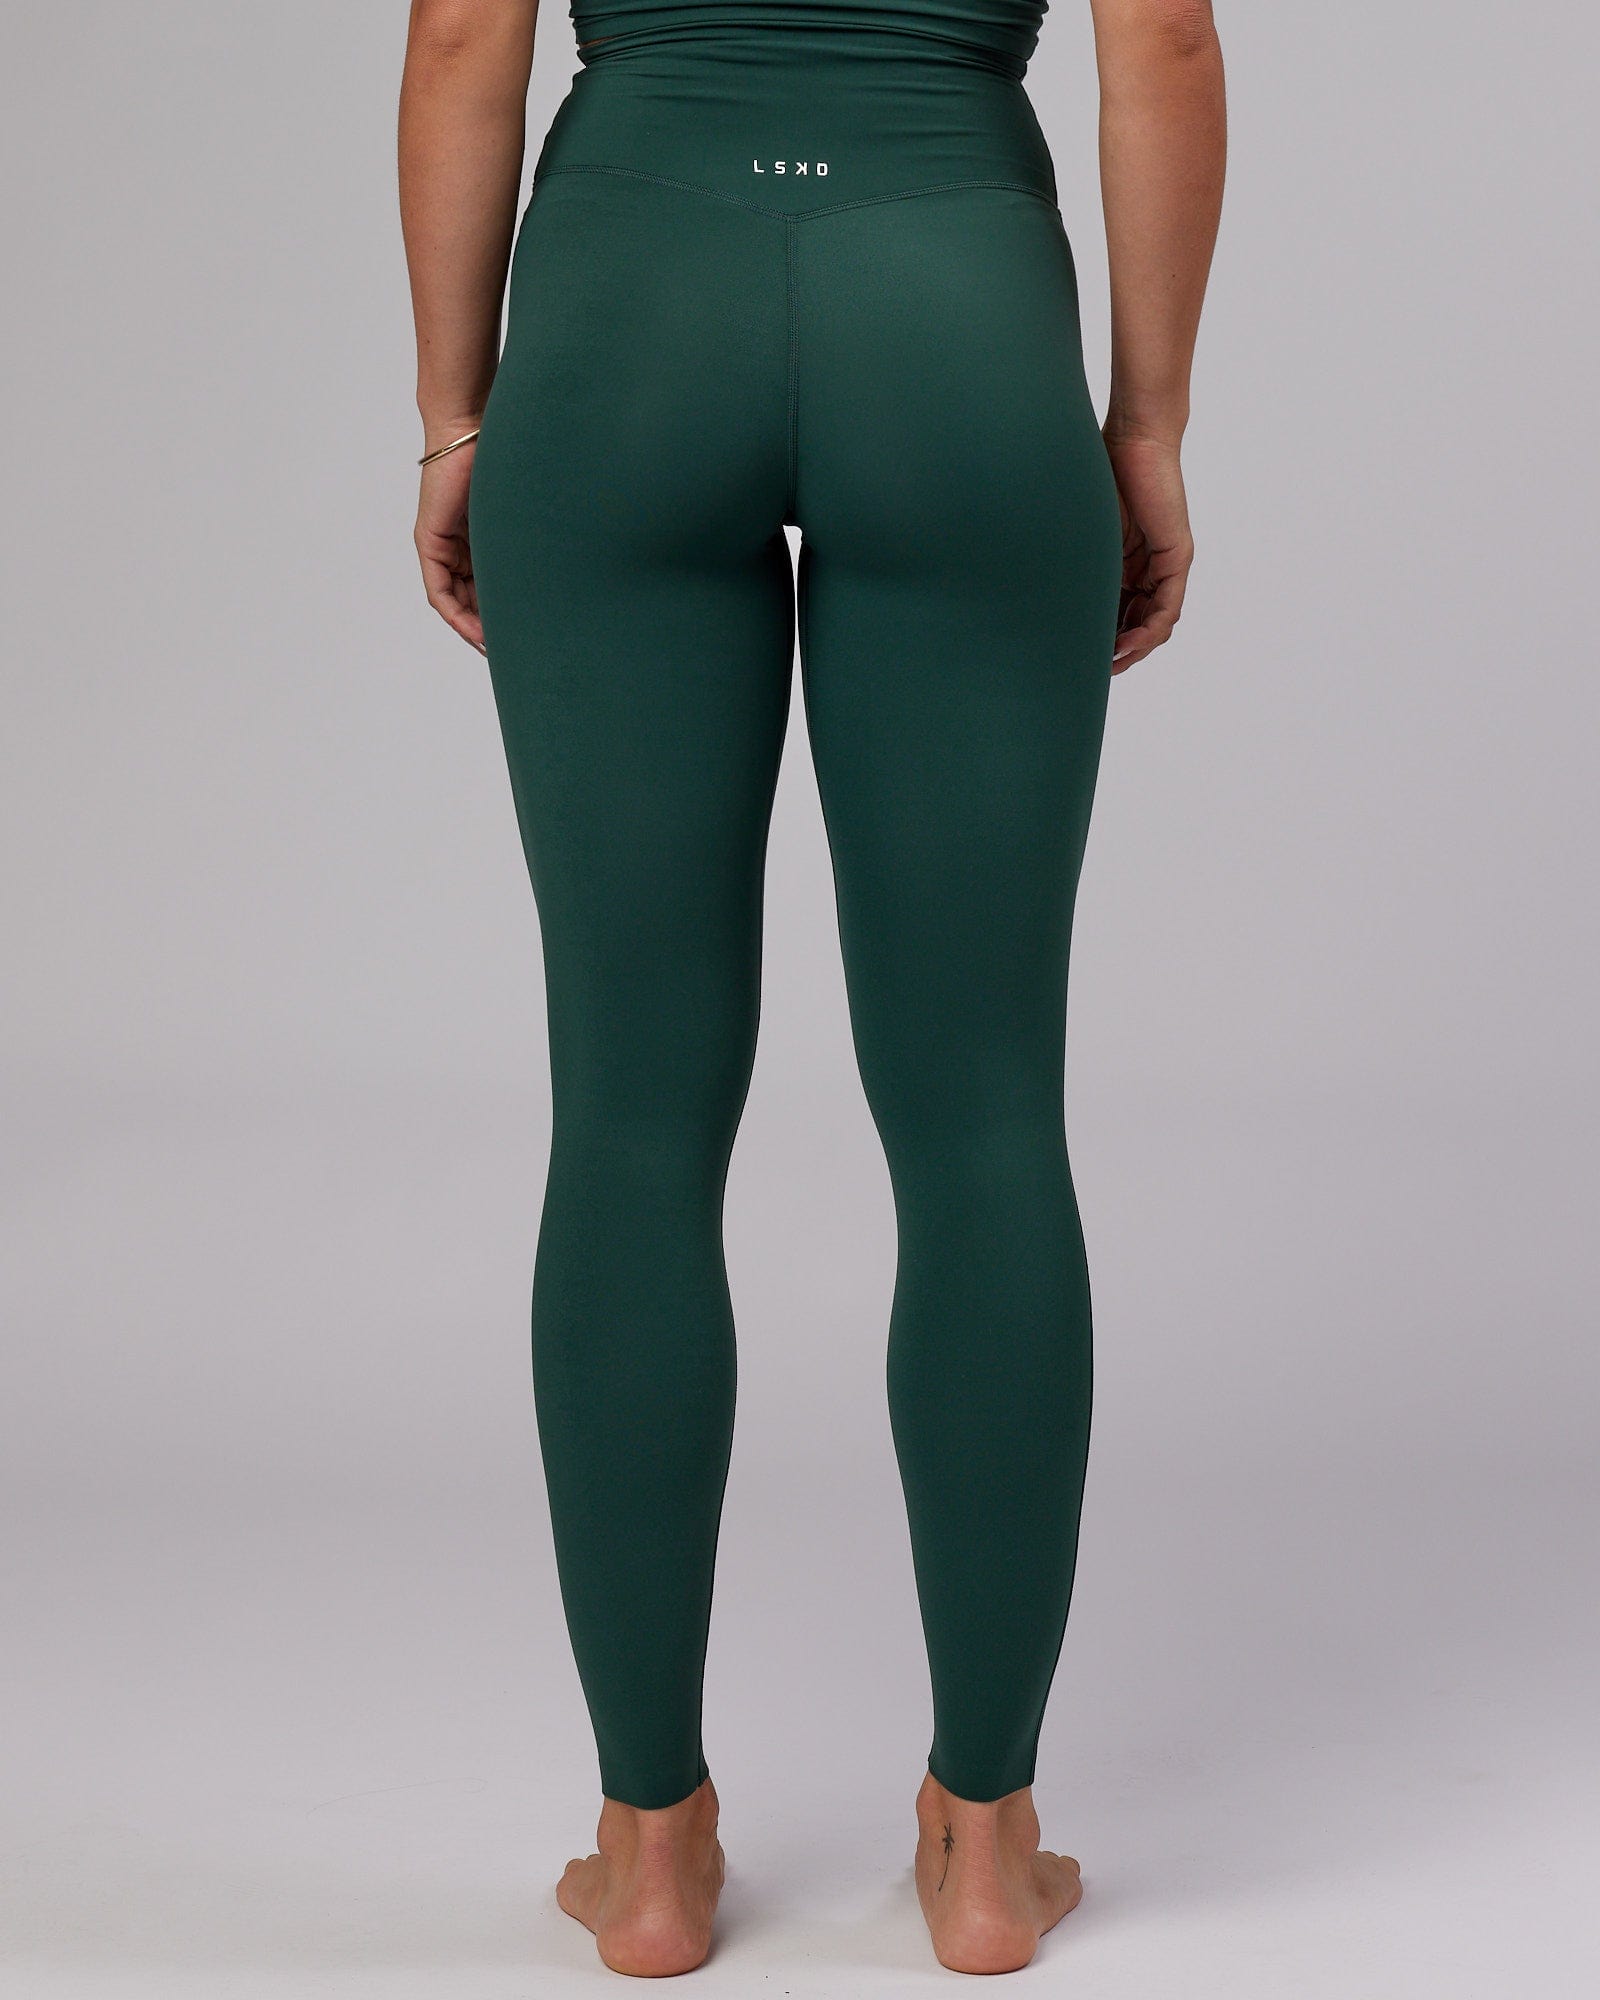 Leggings In Tall Length | International Society of Precision Agriculture